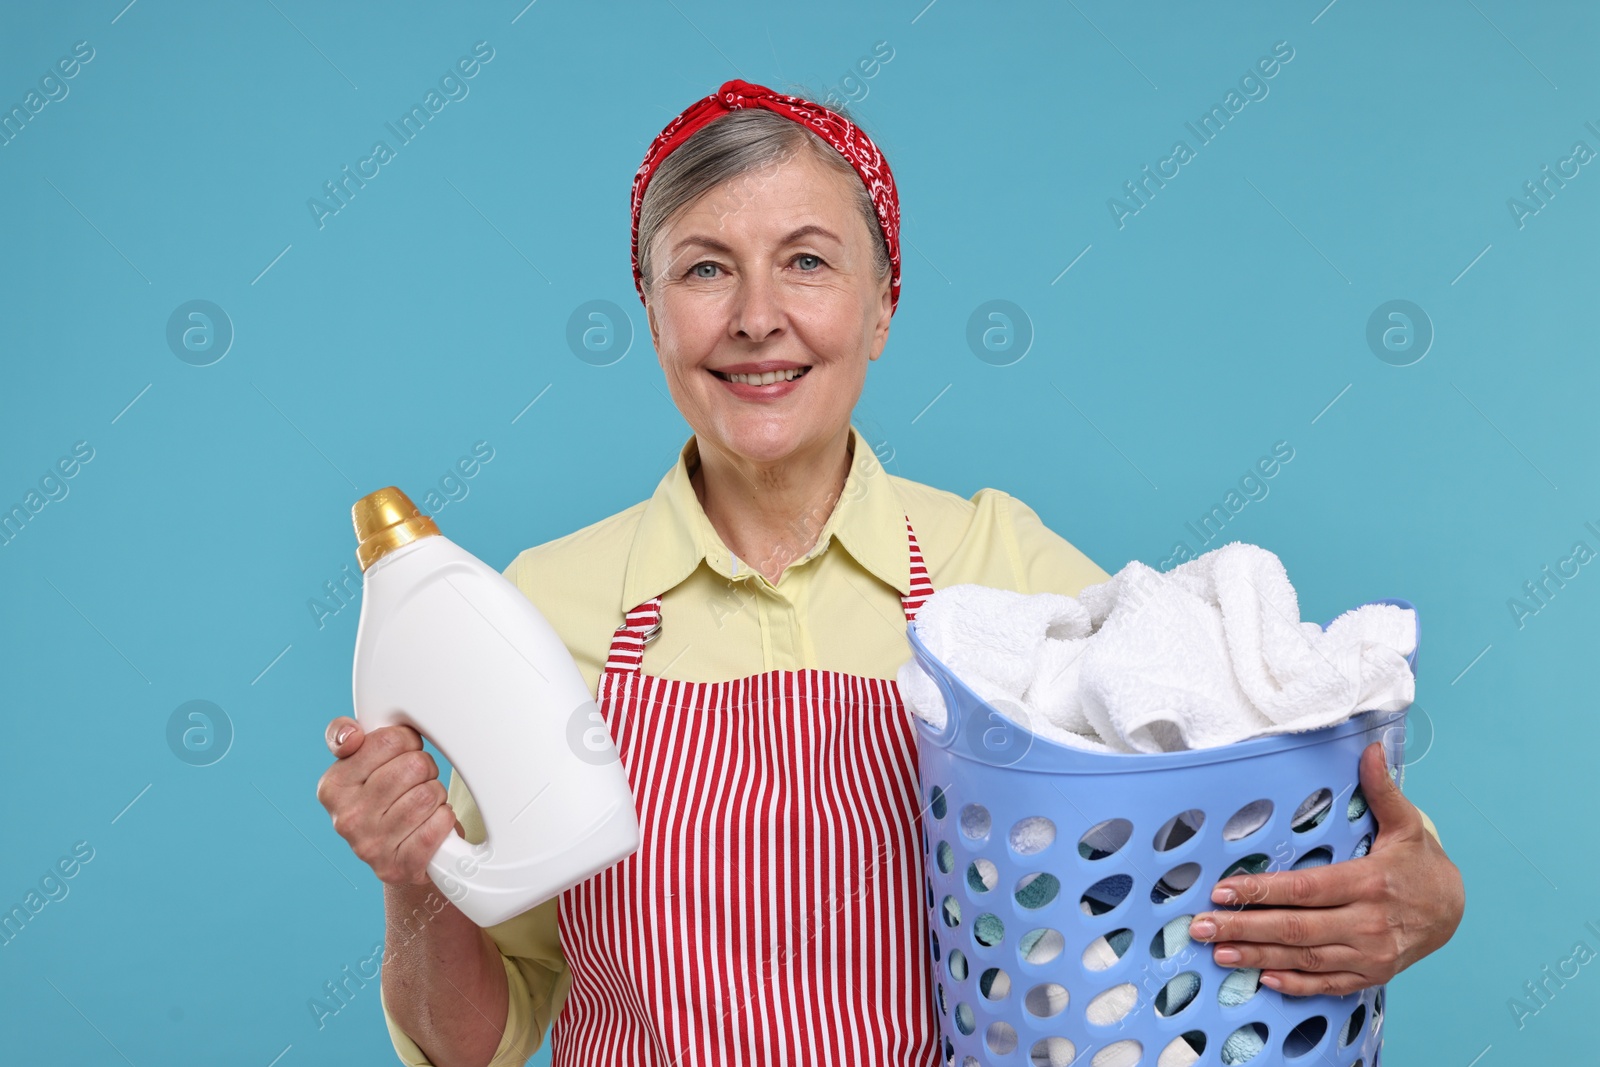 Photo of Happy housewife with detergent and basket full of laundry on light blue background